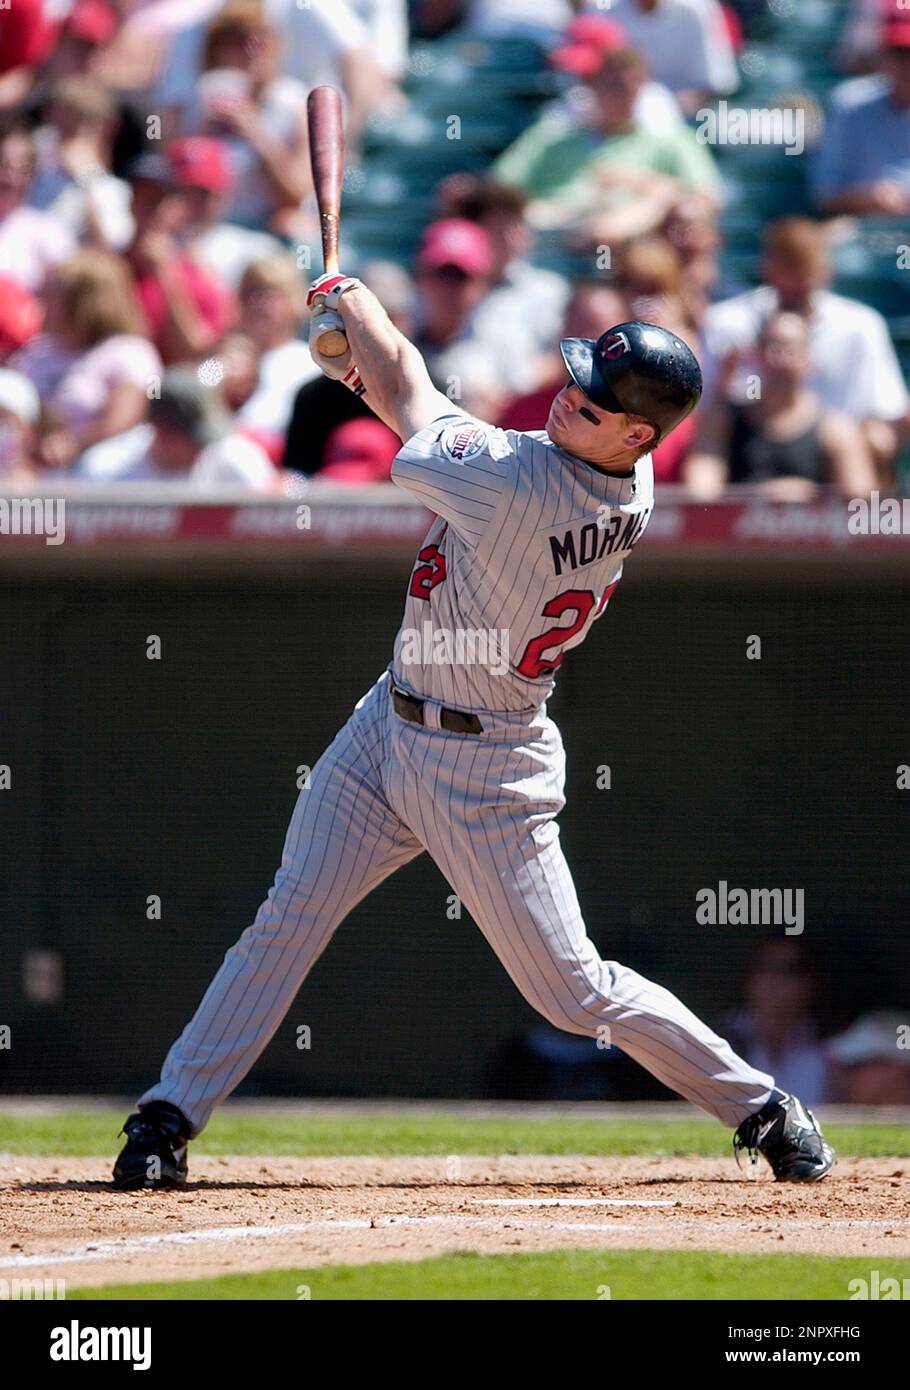 29 Aug. 2004: Minnesota Twins infielder Justin Morneau (27) during an at  bat in a game against the Anaheim Angels played on August 29, 2004 at Angel  Stadium of Anaheim in Anaheim